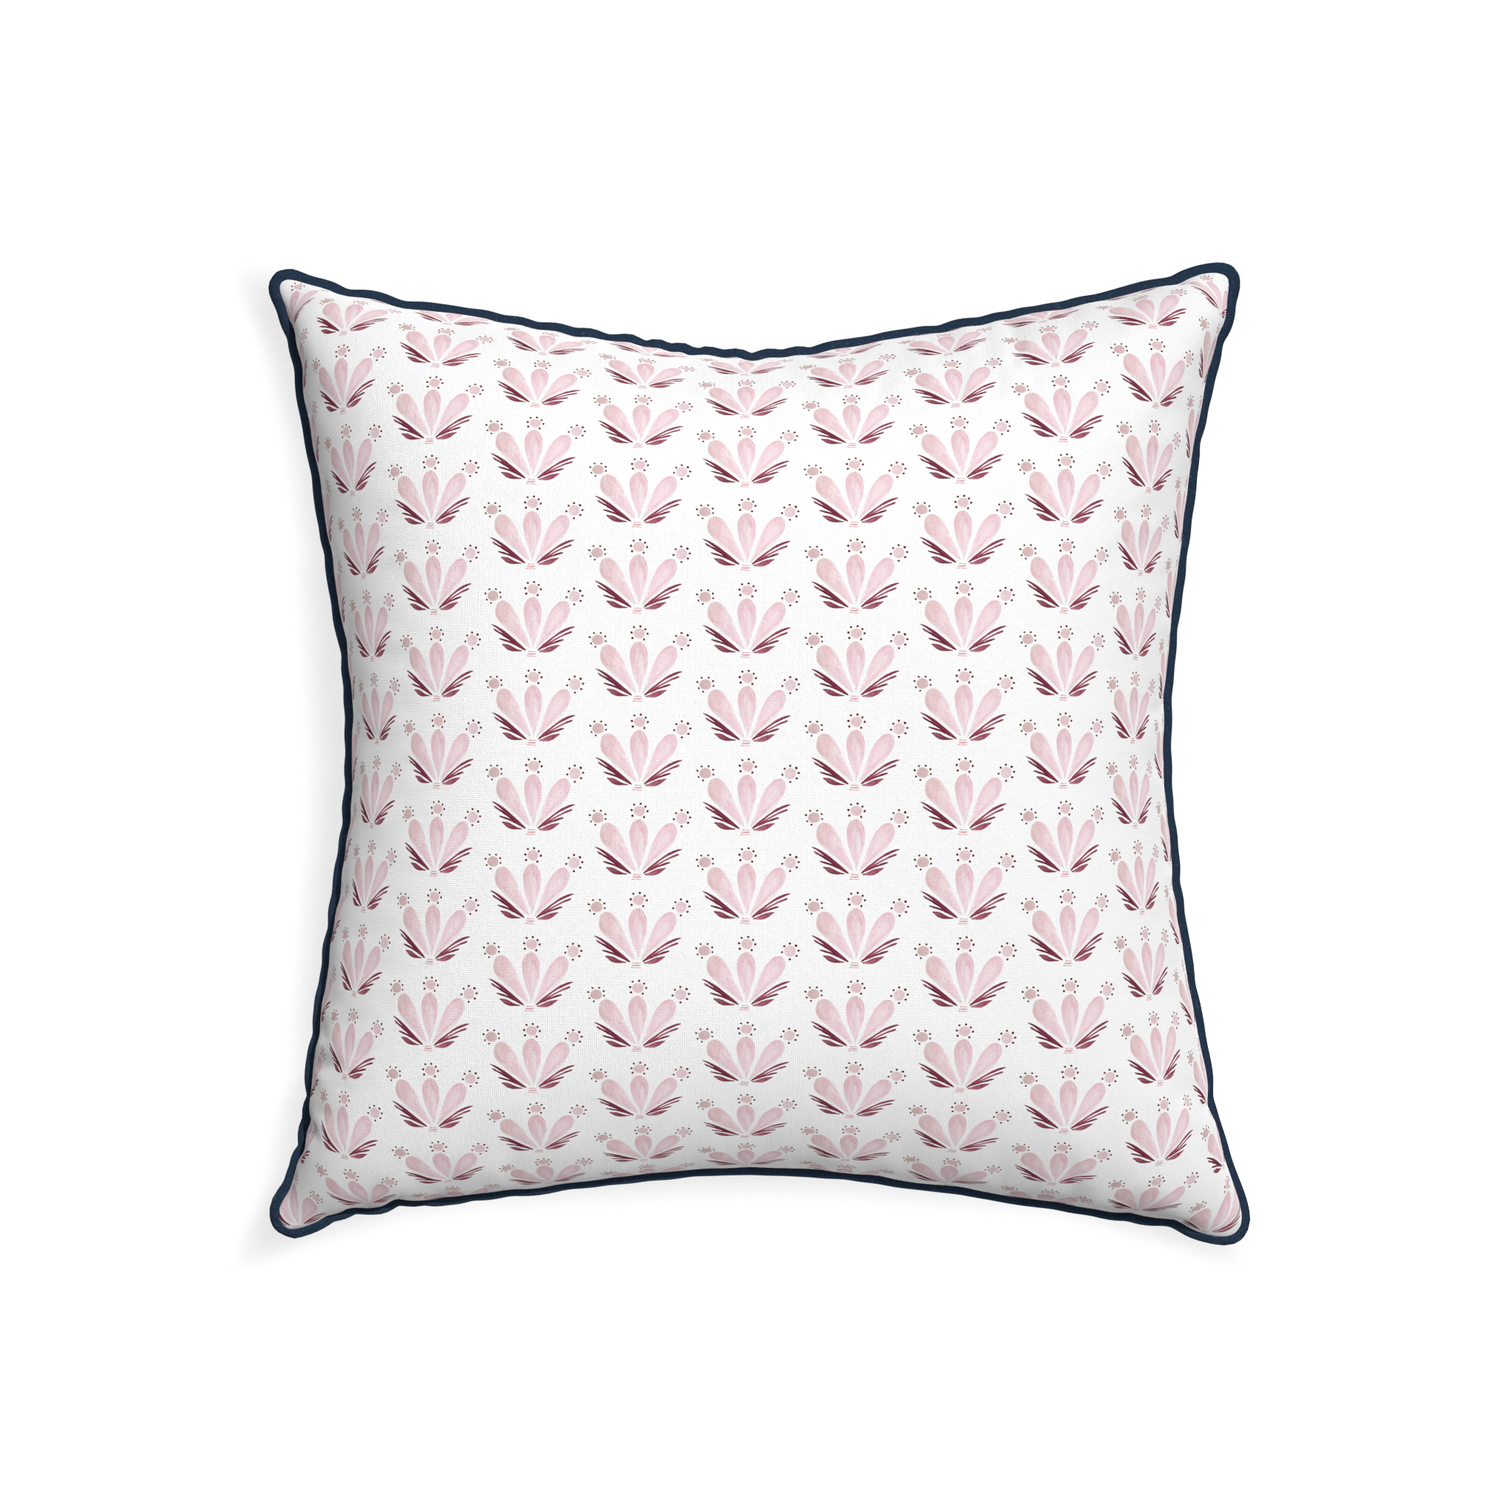 22-square serena pink custom pink & burgundy drop repeat floralpillow with c piping on white background